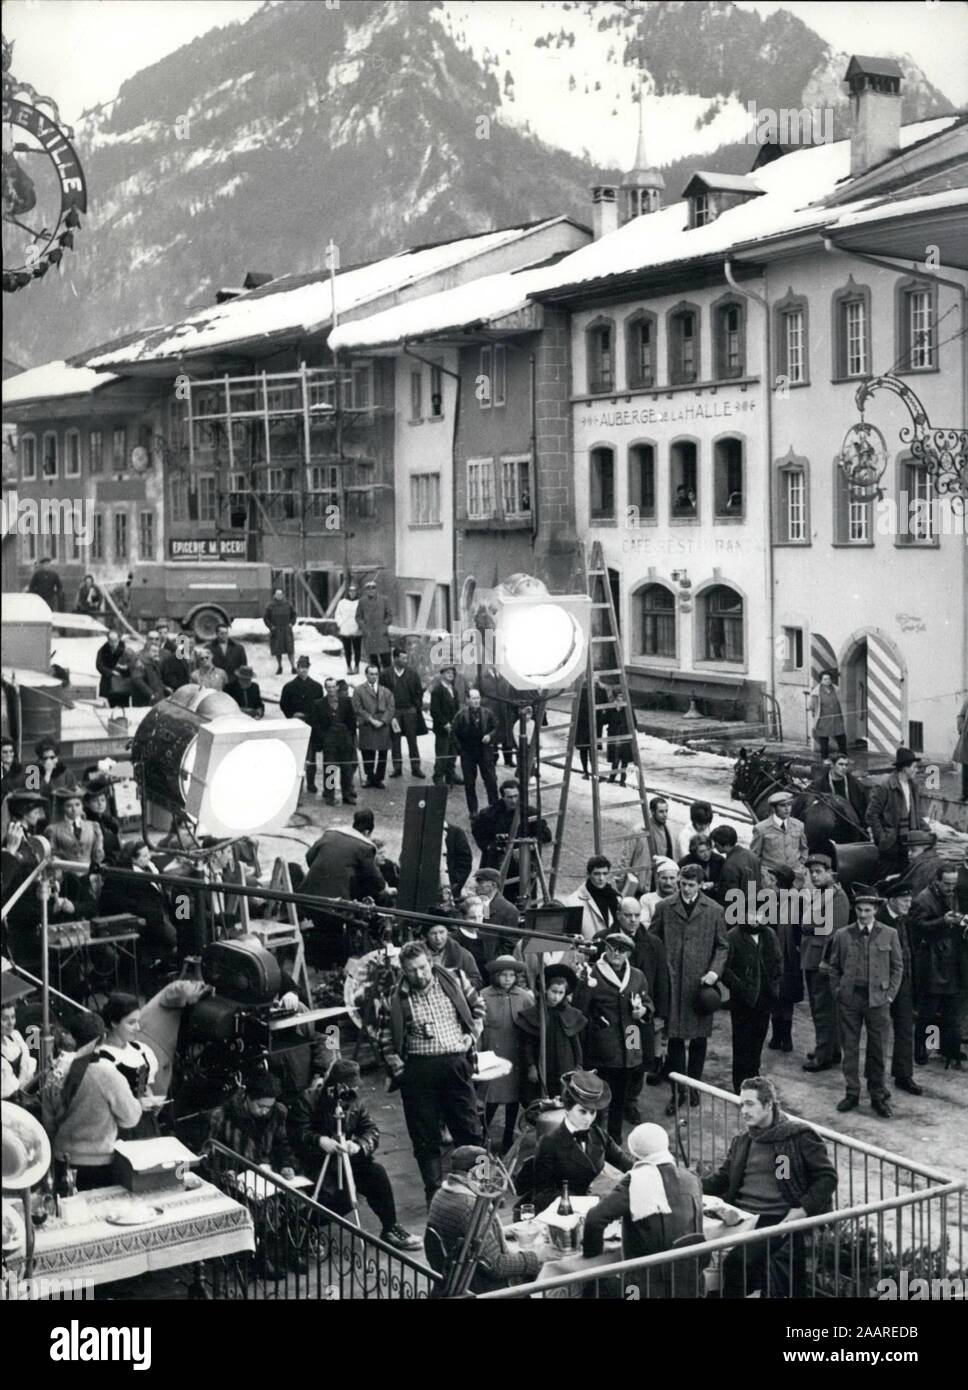 1964 - Gruyere, Switzerland - The film ''Lady L'' is now being produced in the romantic atmosphere and medieval scenery of the little Swiss town, Gruyere. The principal roles are played by SOFIA LOREN, PAUL NEWMAN, DAVID NIVEN, and PETER USTINOV, all seated at a table surrounded by cast and crew, and mountains while filming a scene for the movie. Credit: Keystone Pictures USA/ZUMAPRESS.com/Alamy Live News Stock Photo